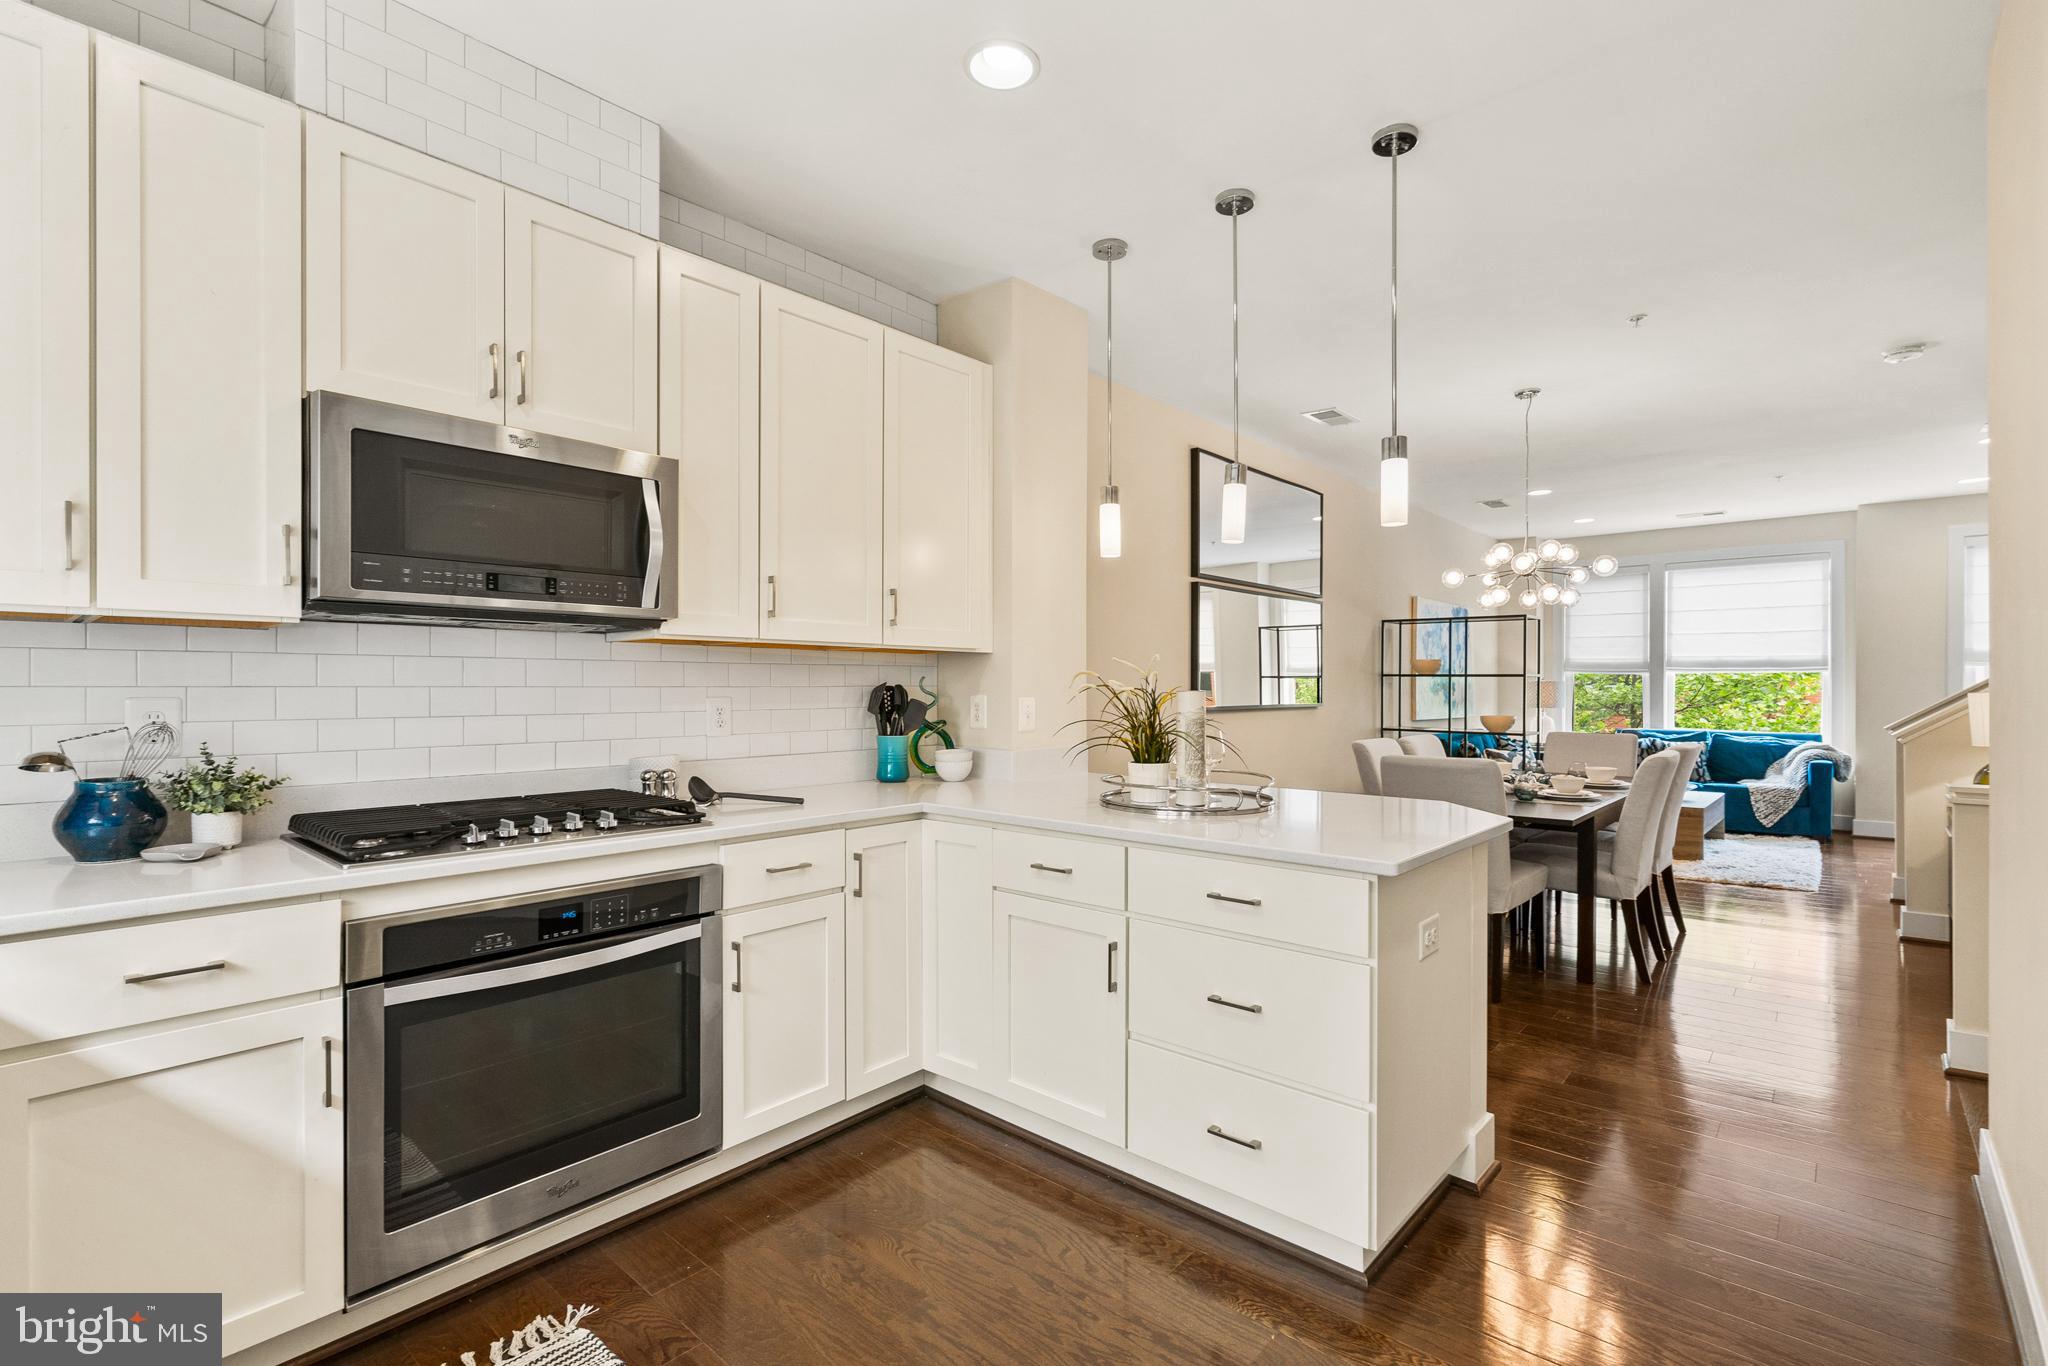 a kitchen with a white stove top oven and white cabinets with wooden floor